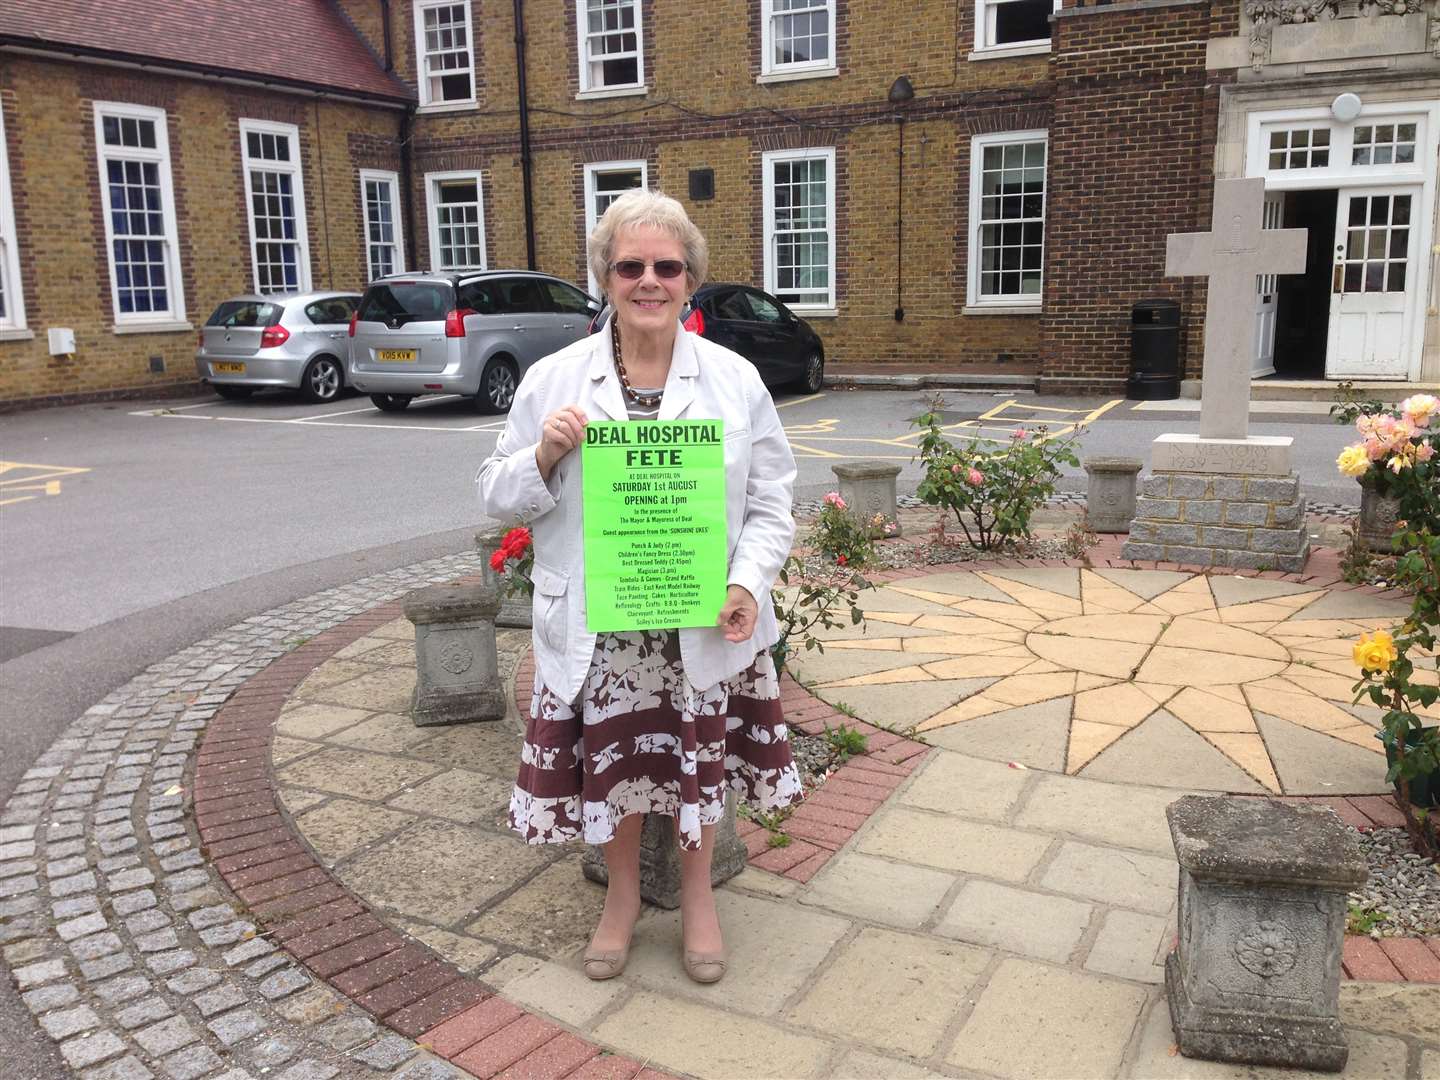 Maureen Bane is looking forward to Saturday's family fun at Deal Hospital Fete Location